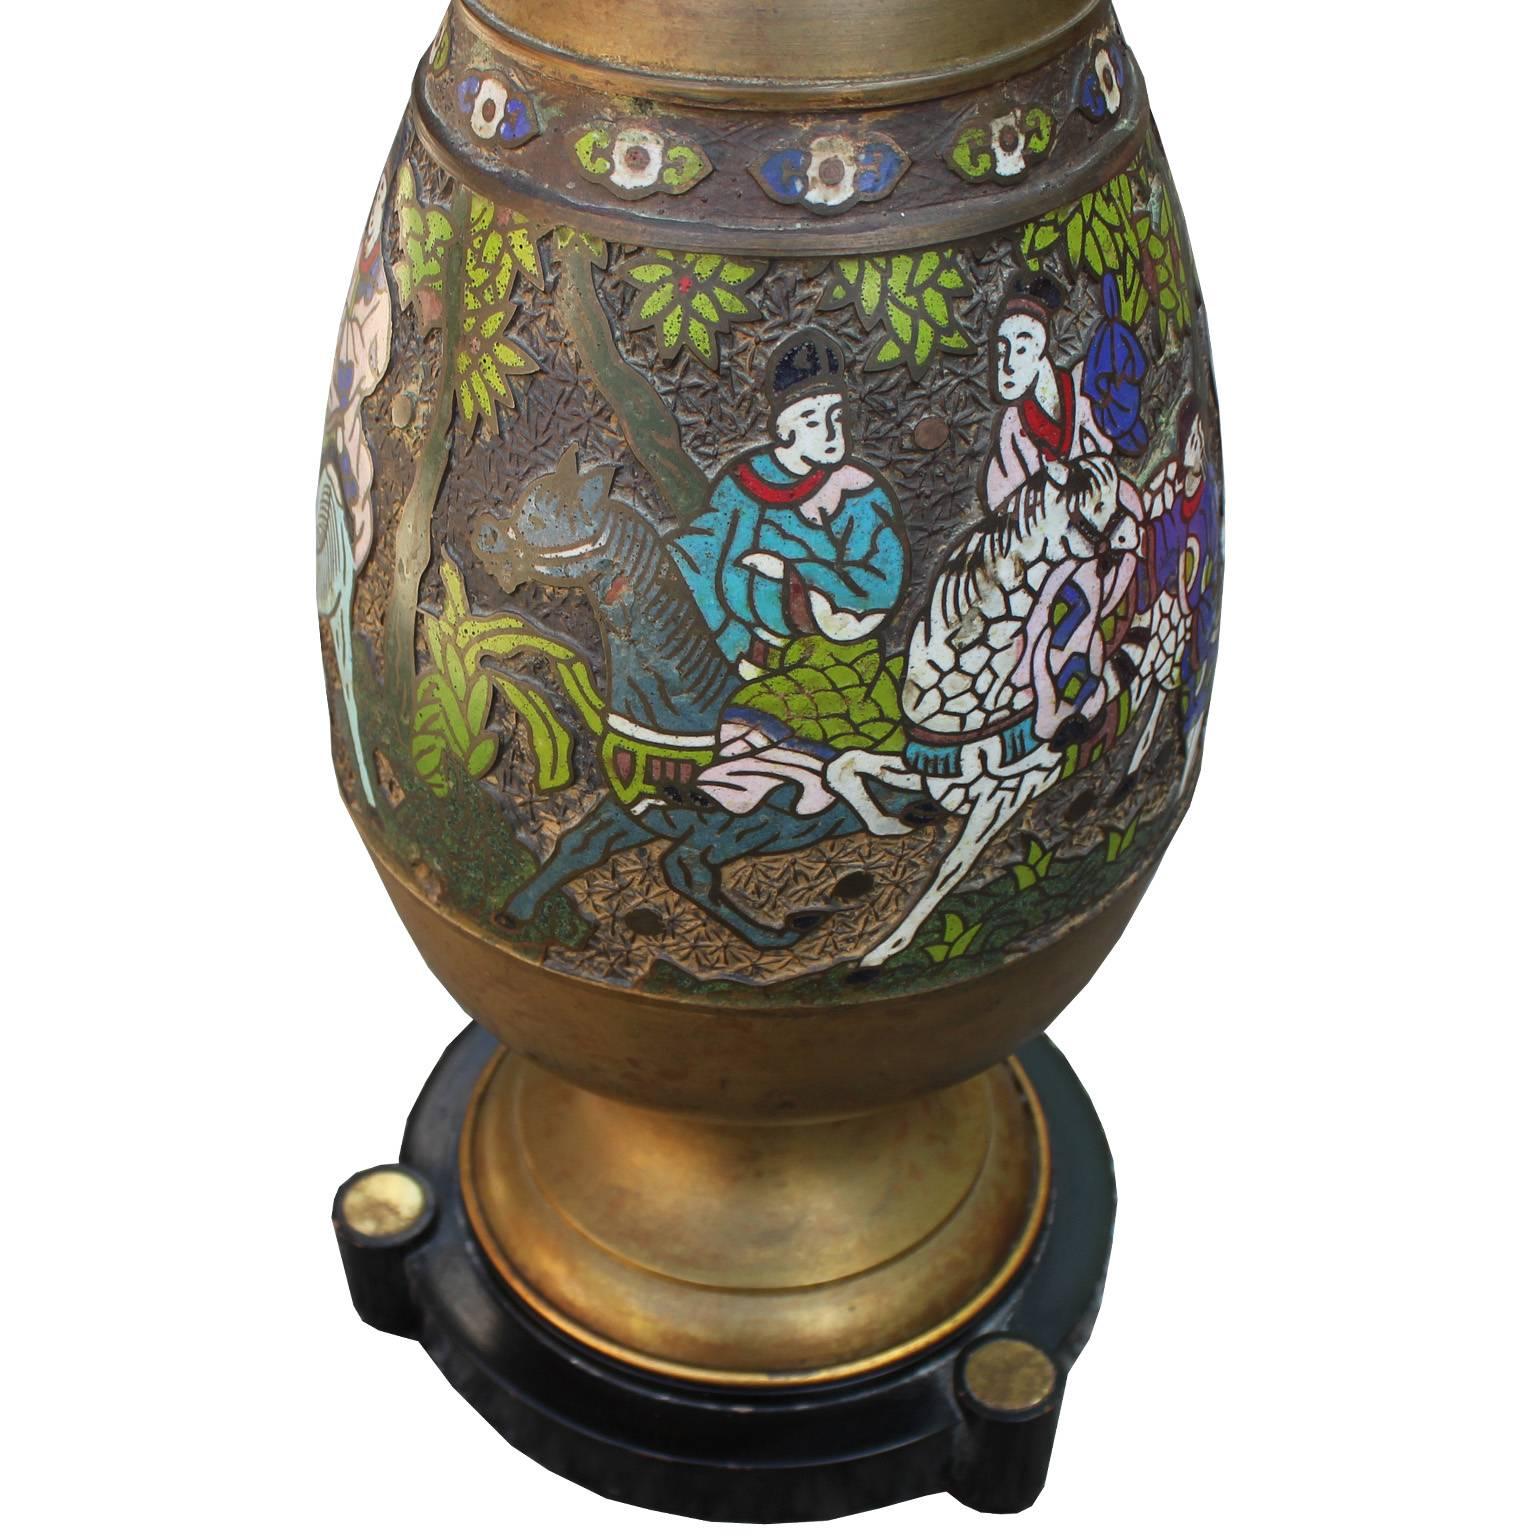 Fabulous Chinese style bronze cloisonné lamp by Marbro. Bronze and enamel lamp features a colorful figural motif.